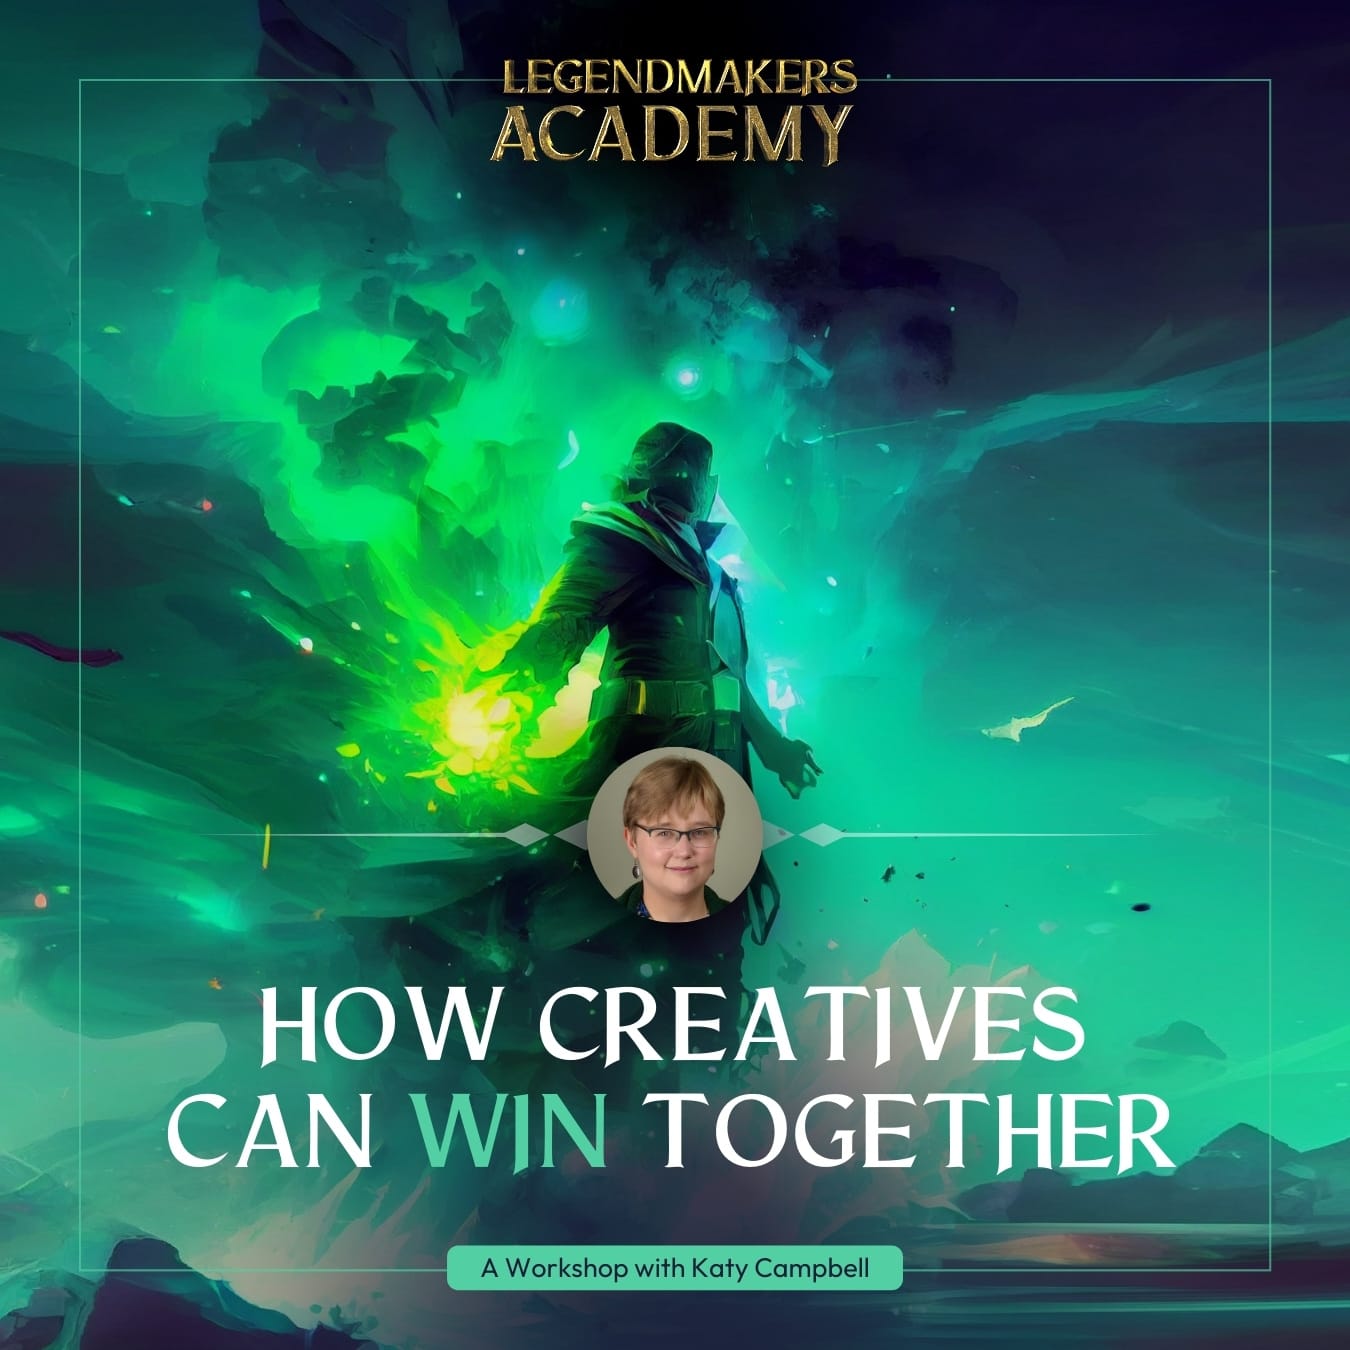 How Creatives can Win Together! Online Workshop in April